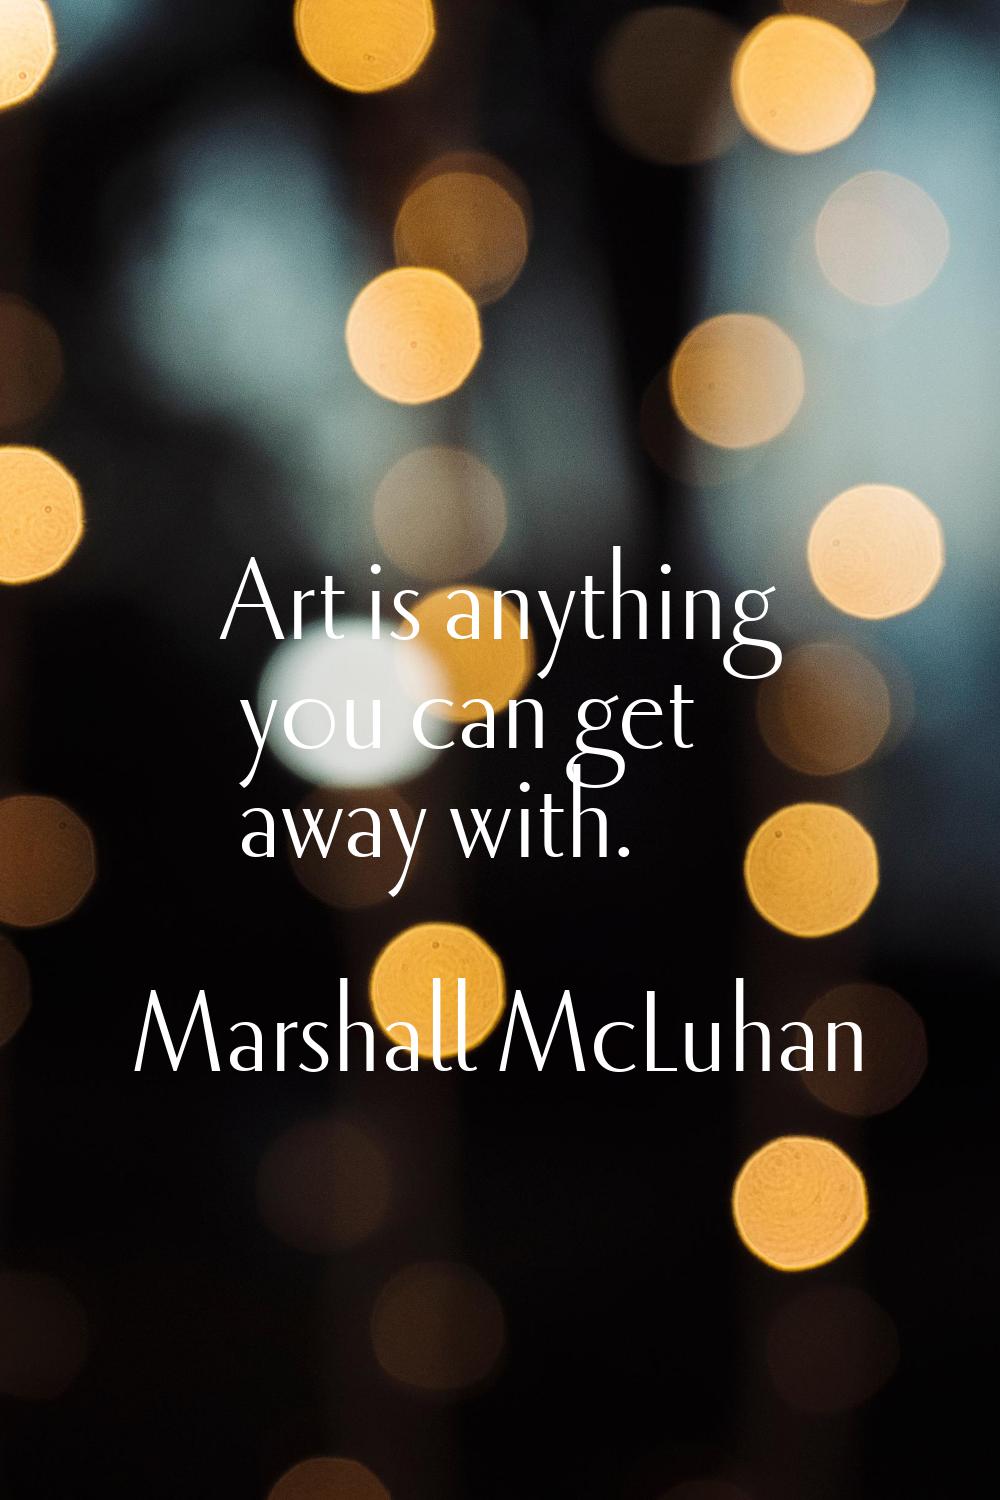 Art is anything you can get away with.